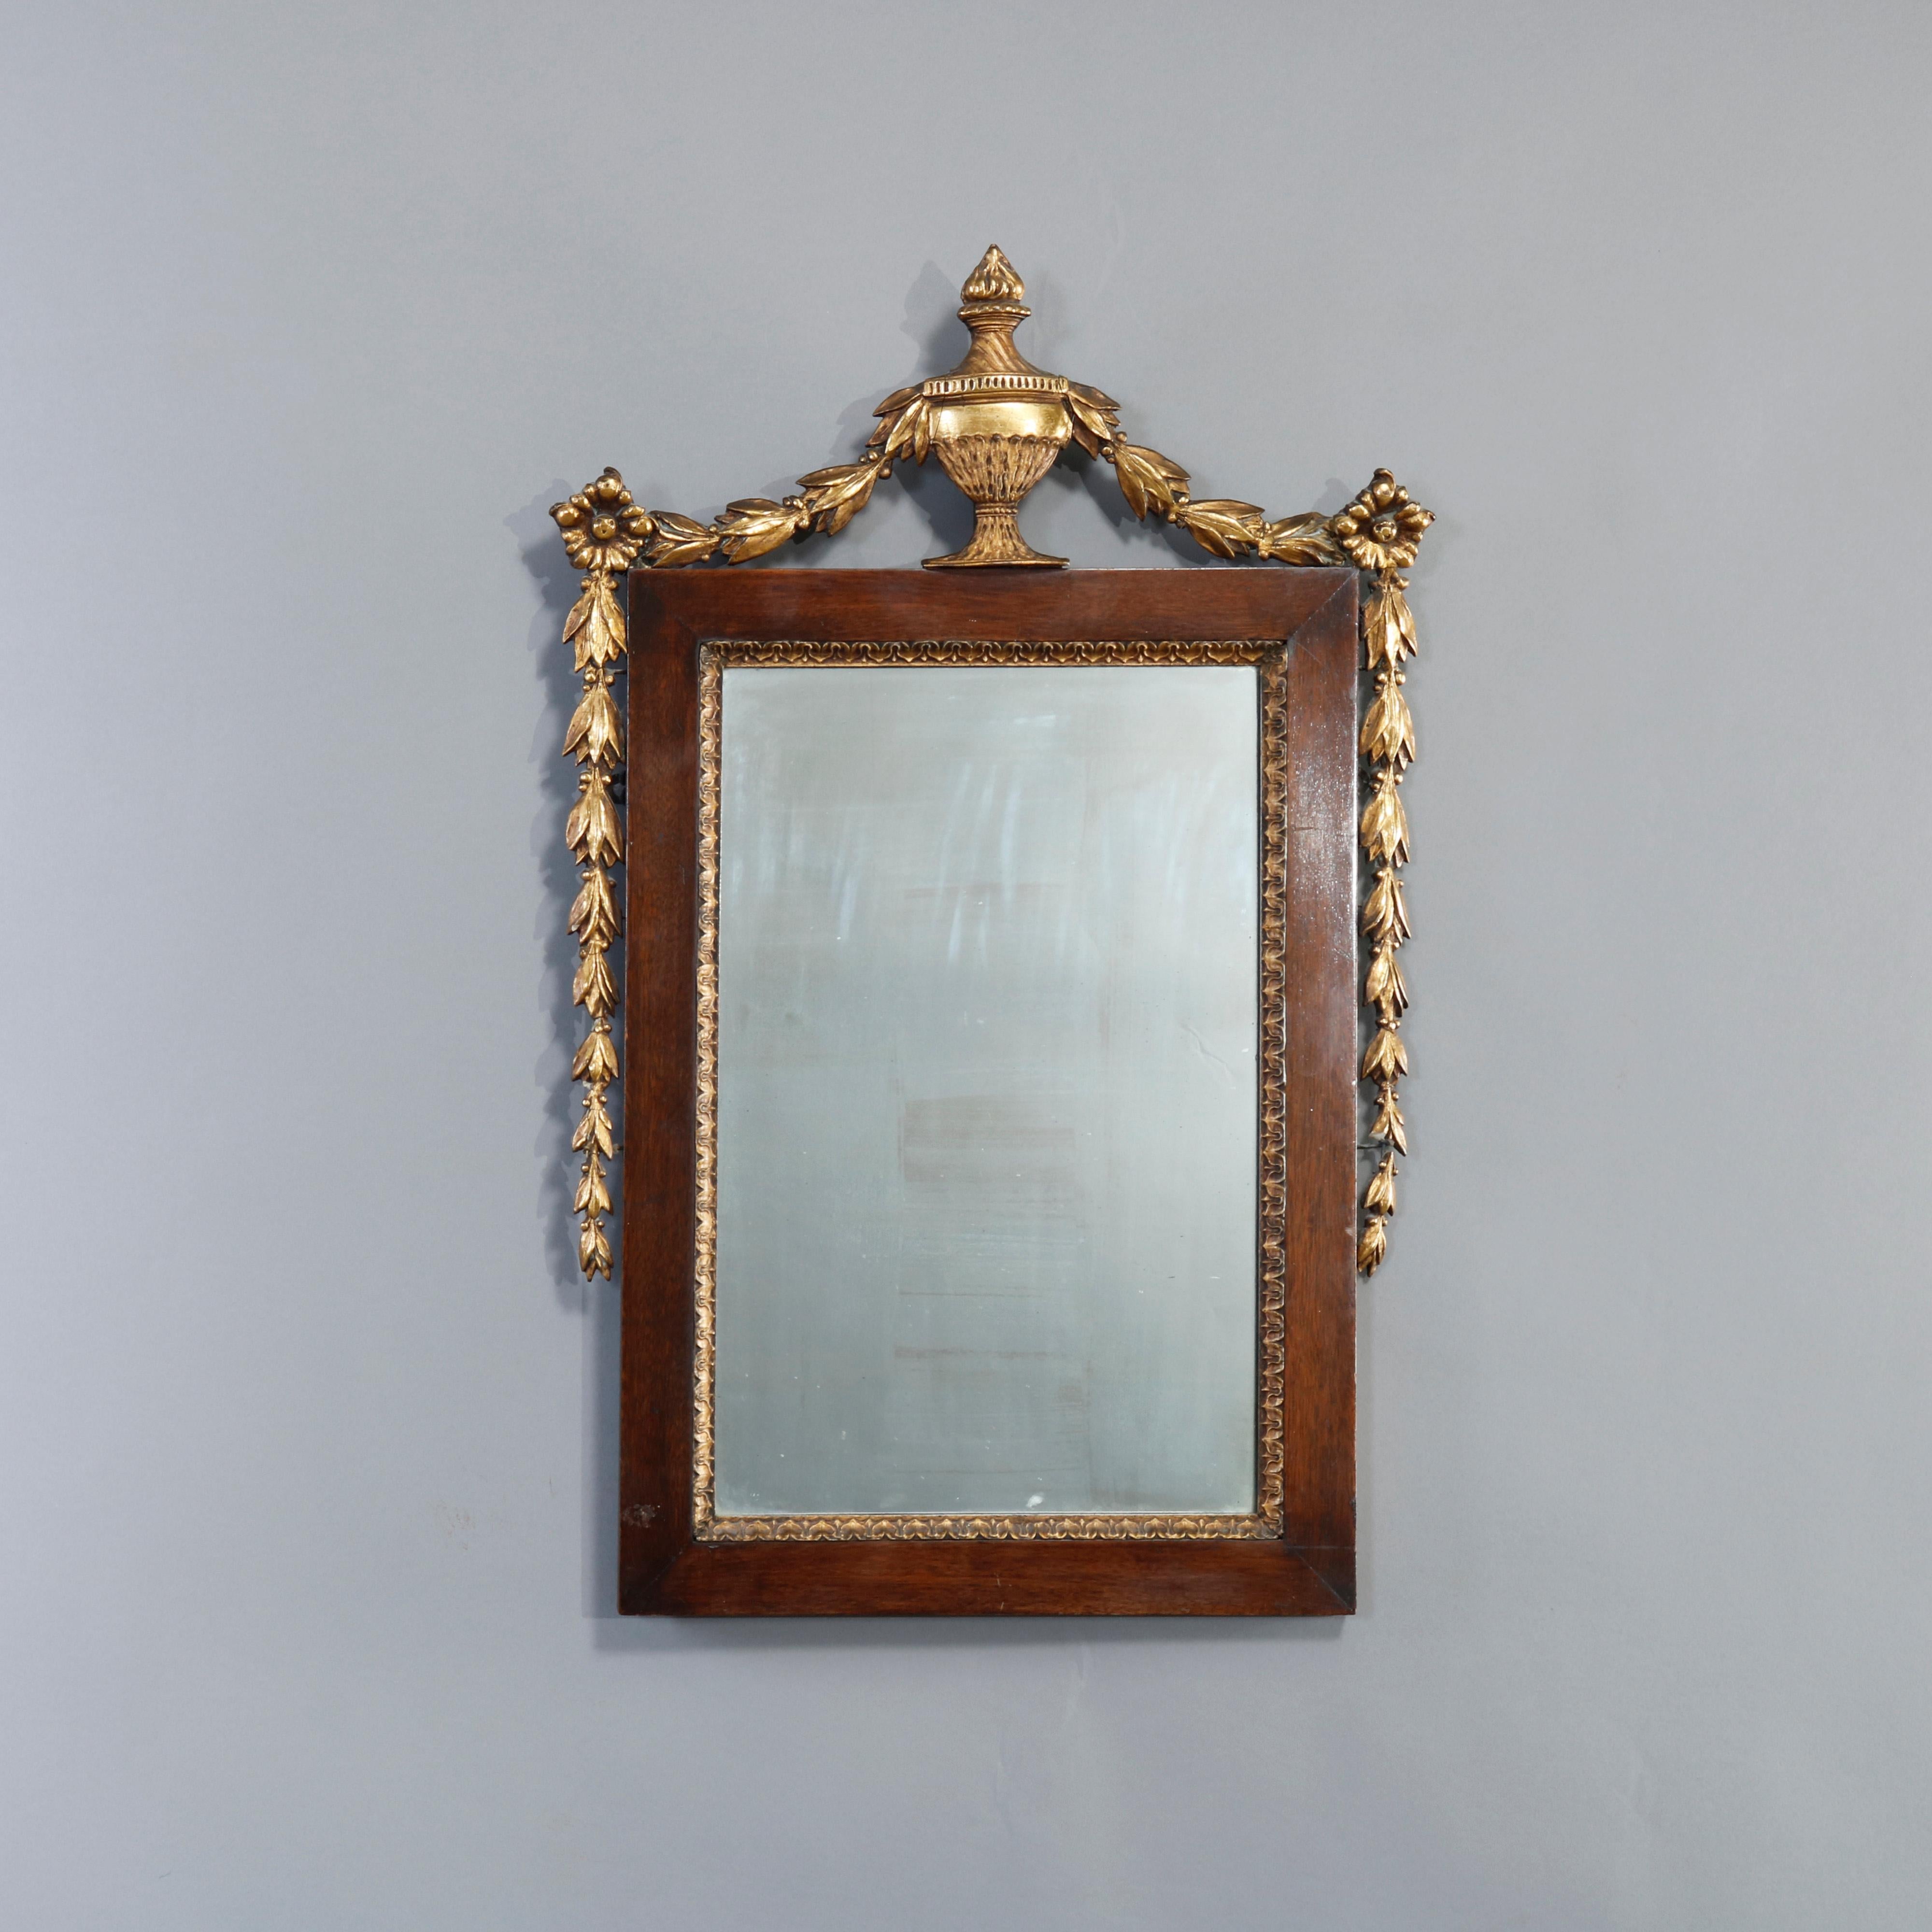 Antique French Neoclassical Mahogany & Giltwood Wall Mirror, Circa 1840 For Sale 8